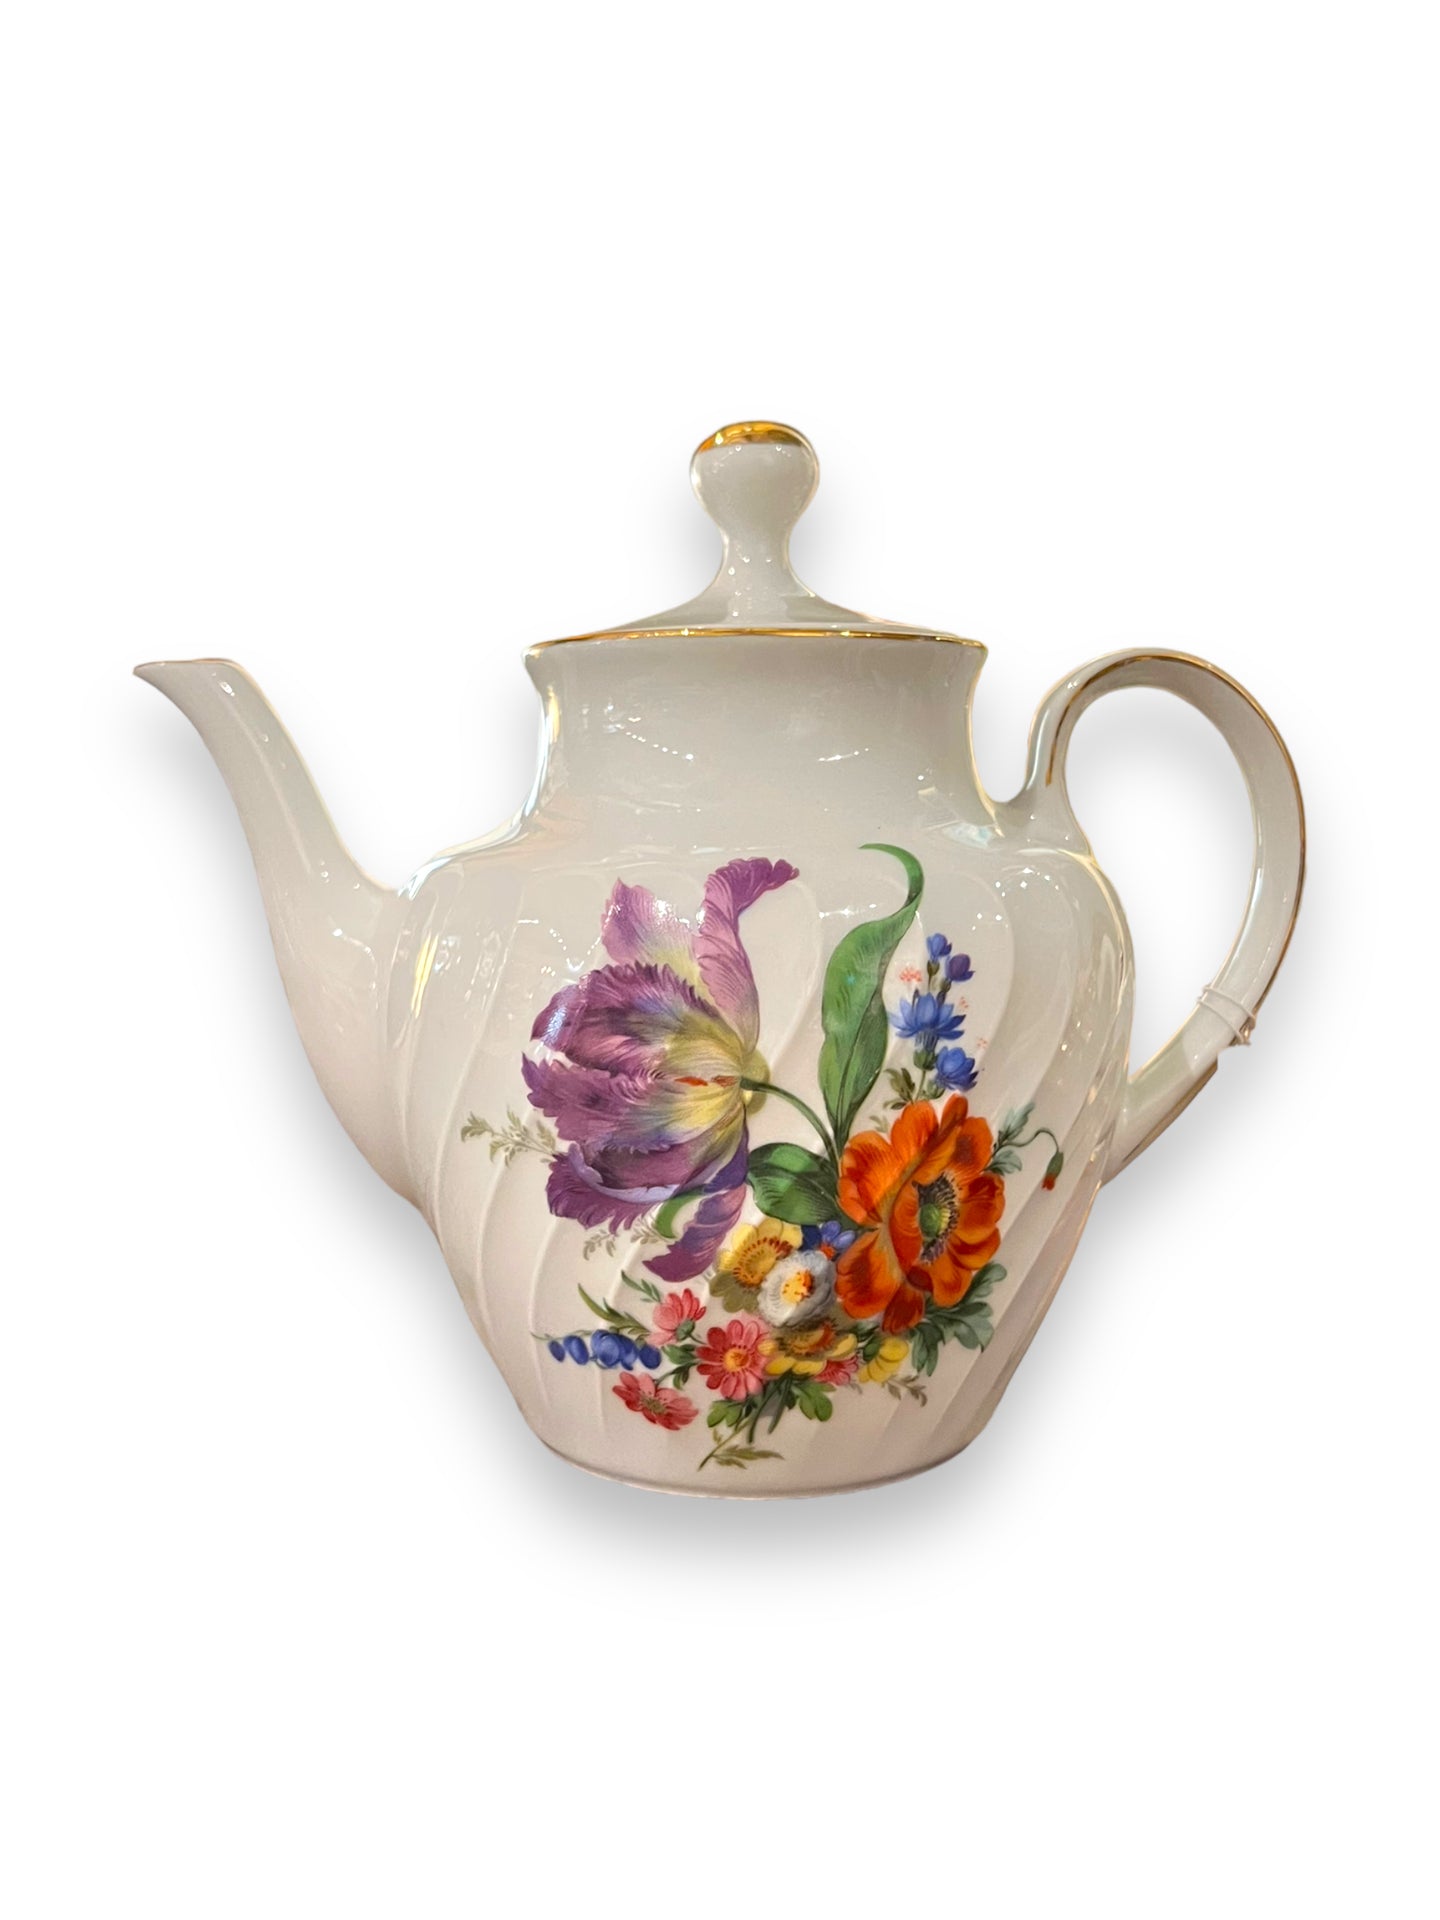 Bareuther Tea Pot Germany - DeFrenS